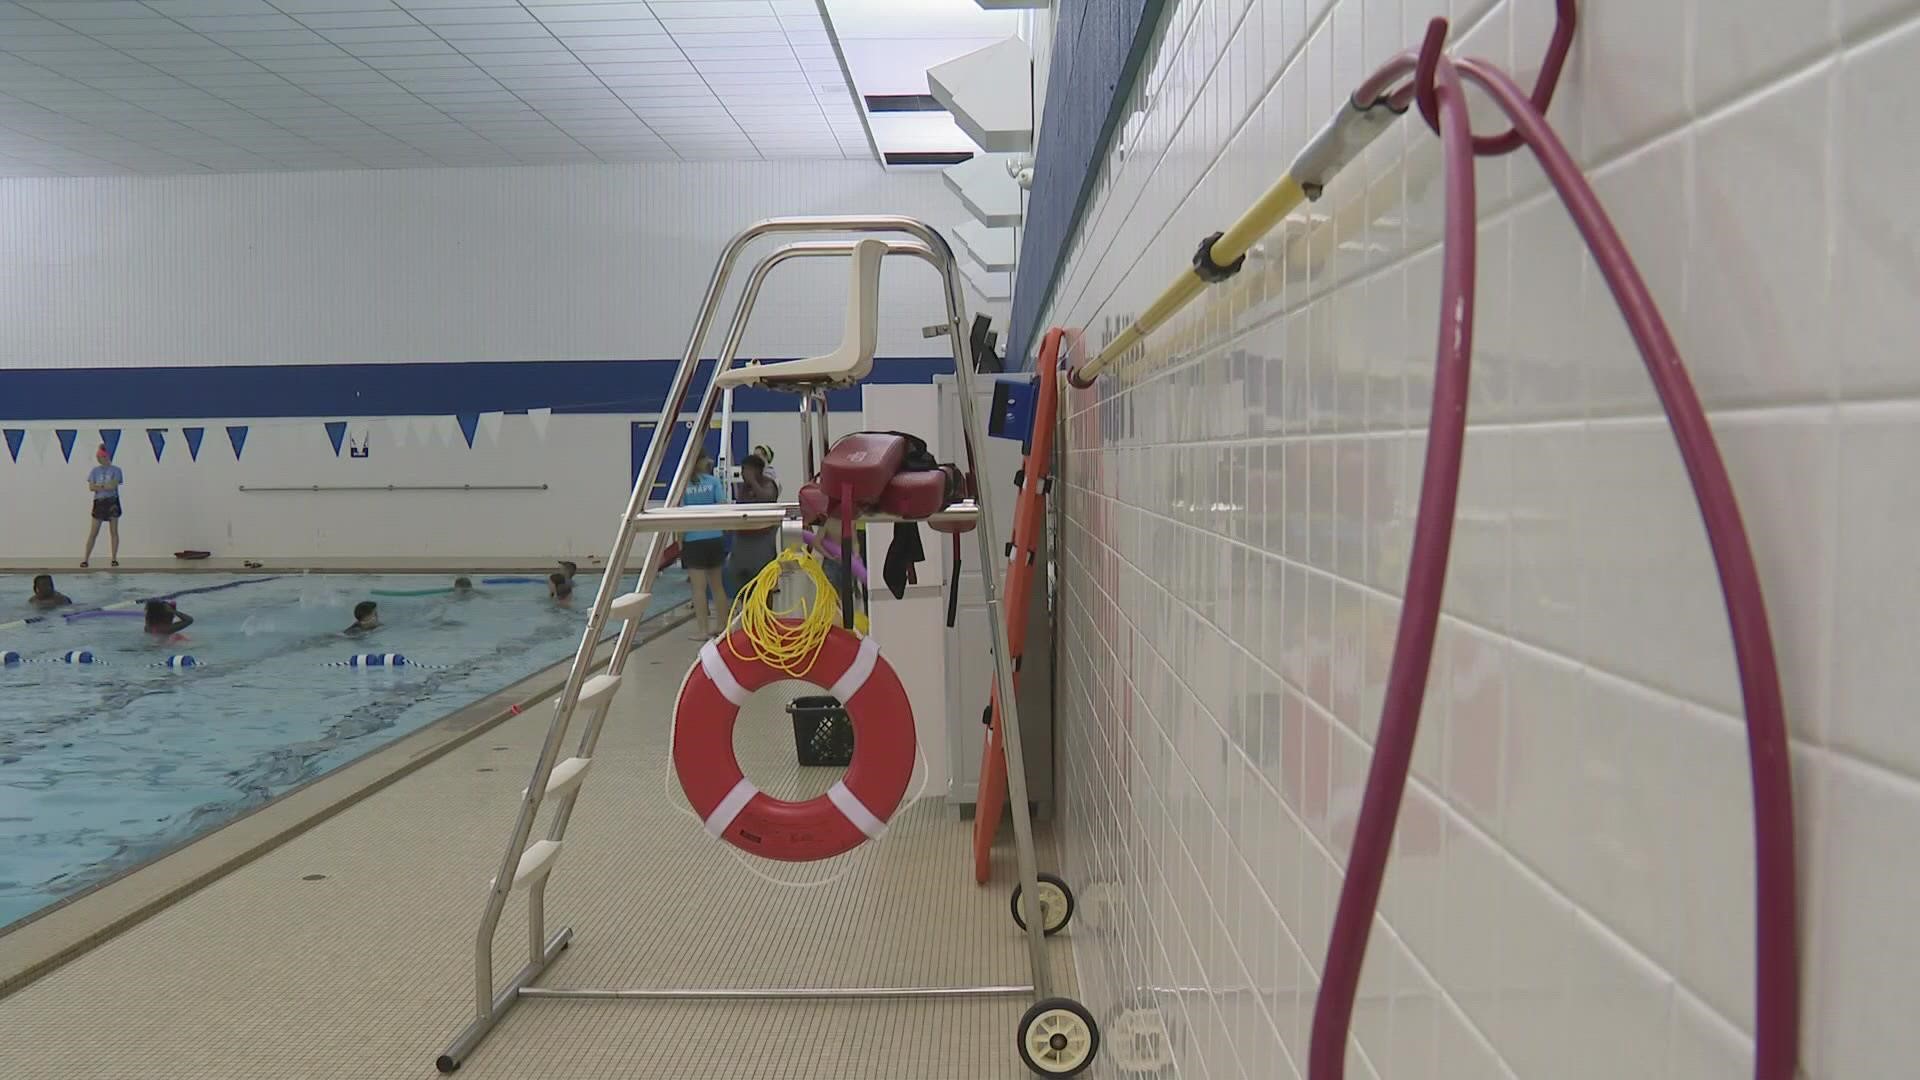 Robin Dennany, Aquatics Director for Boys and Girls Club of the Muskegon Lakeshore says even an average swimmer can perfect the skills to become a lifeguard.